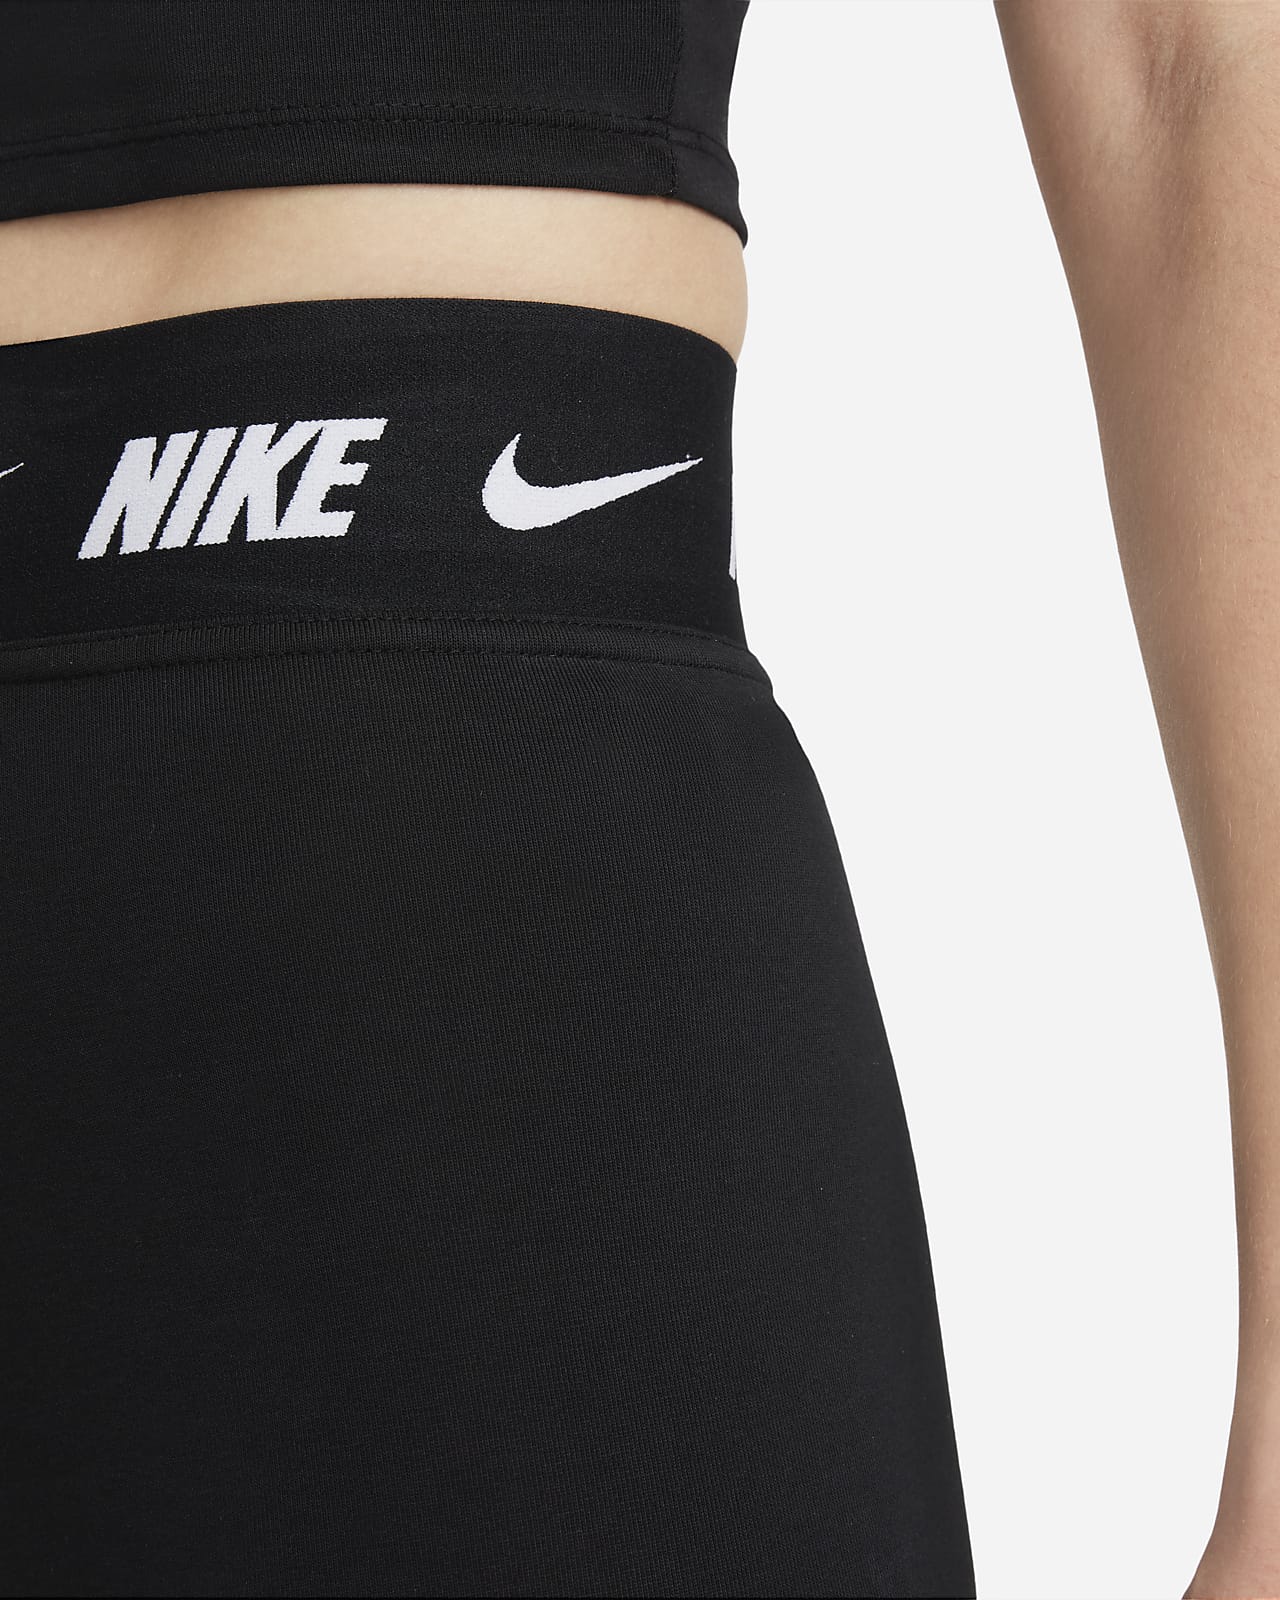 Stay confident in your gym wear with Nike's One High-Rise Leggings, by  Play Fair